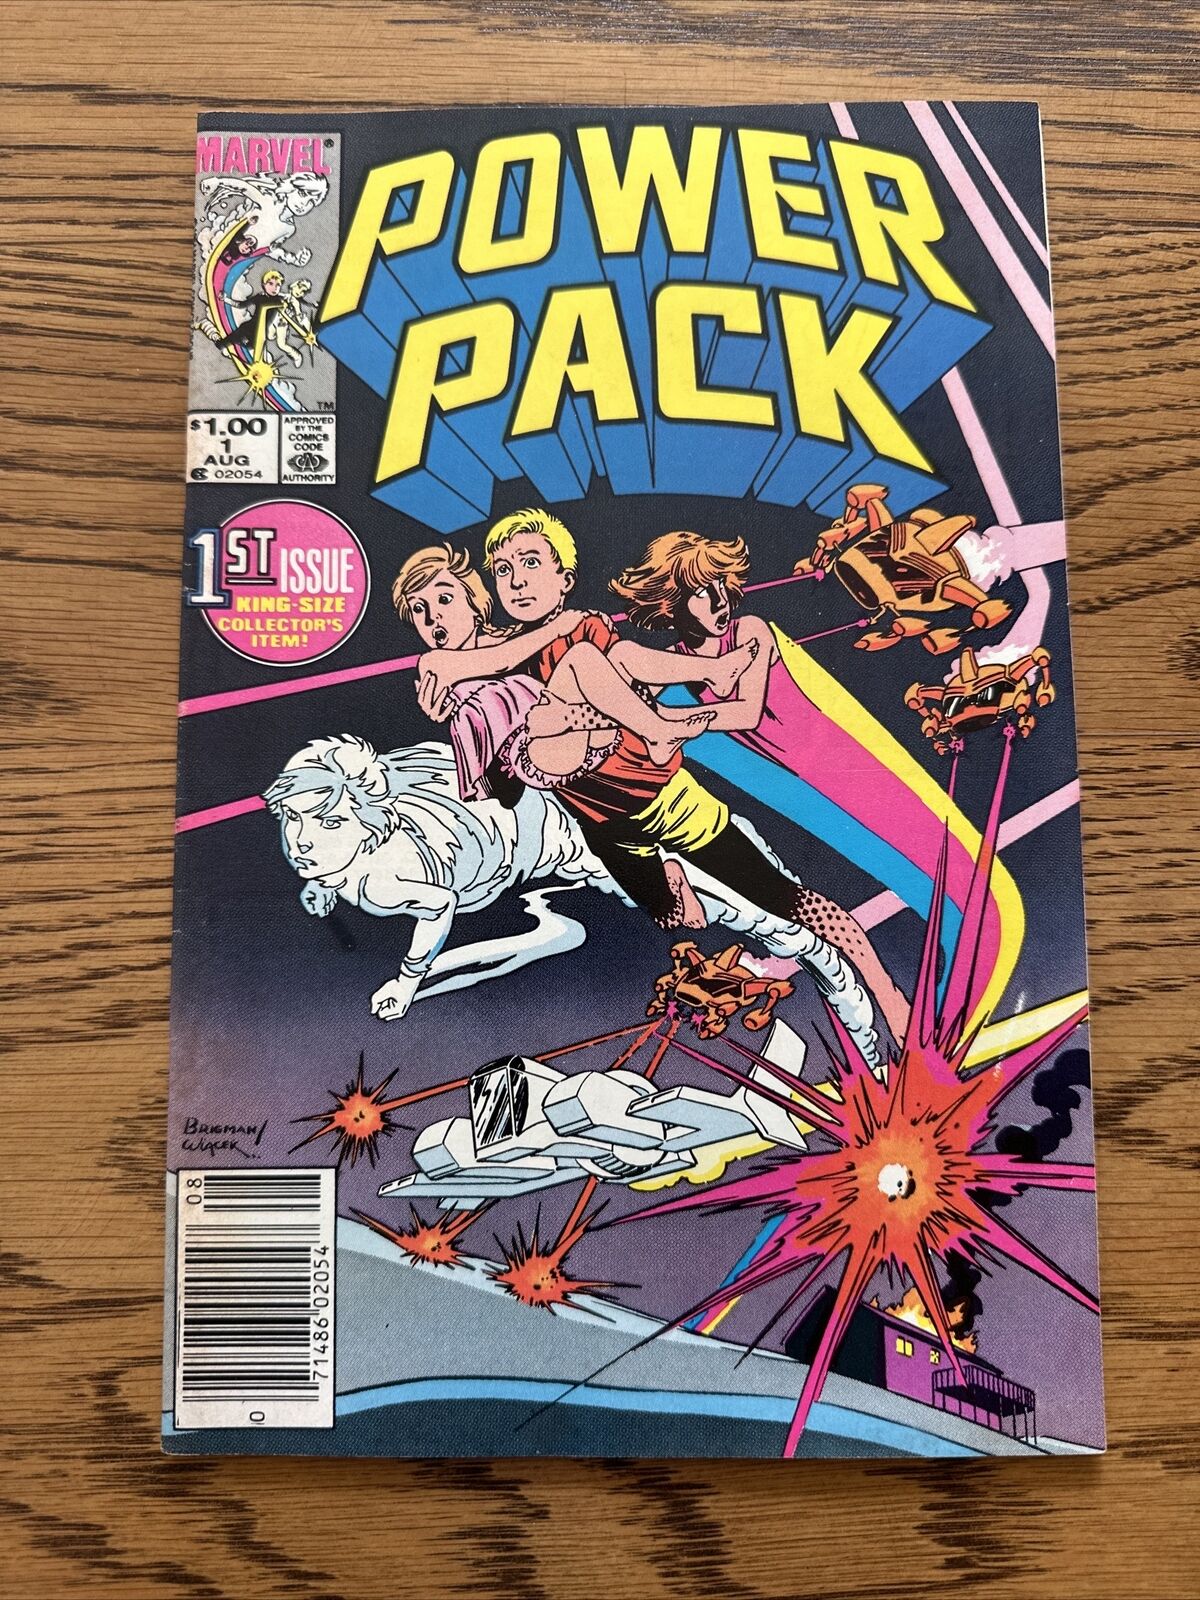 Power Pack #1 (Marvel 1984) Origin and 1st Appearance of Power Pack